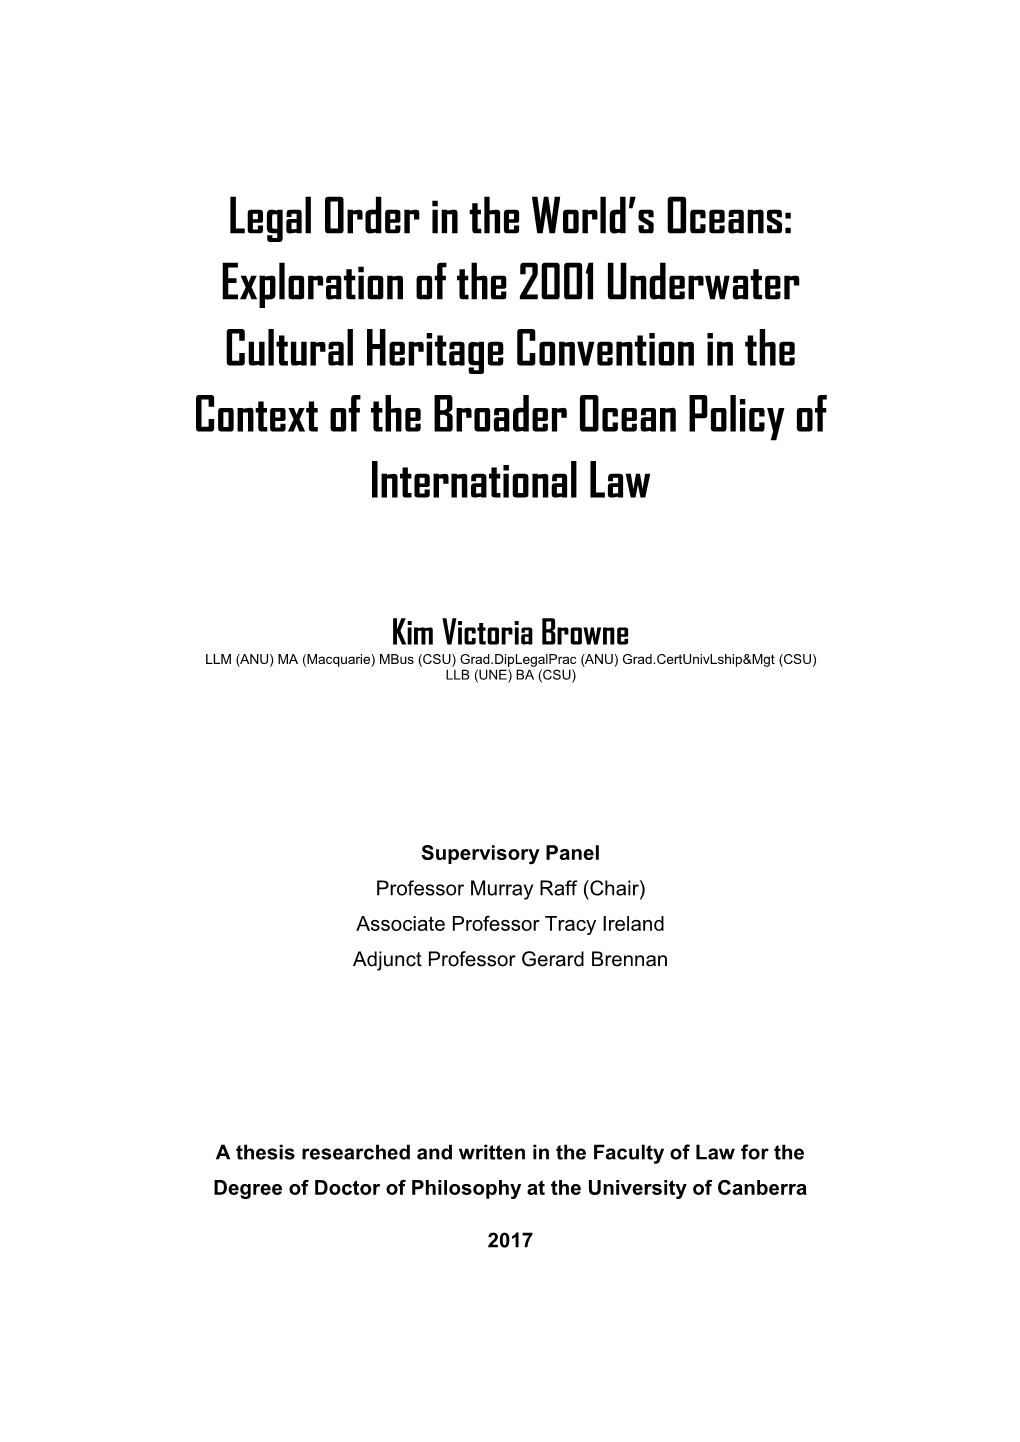 Exploration of the 2001 Underwater Cultural Heritage Convention in the Context of the Broader Ocean Policy of International Law